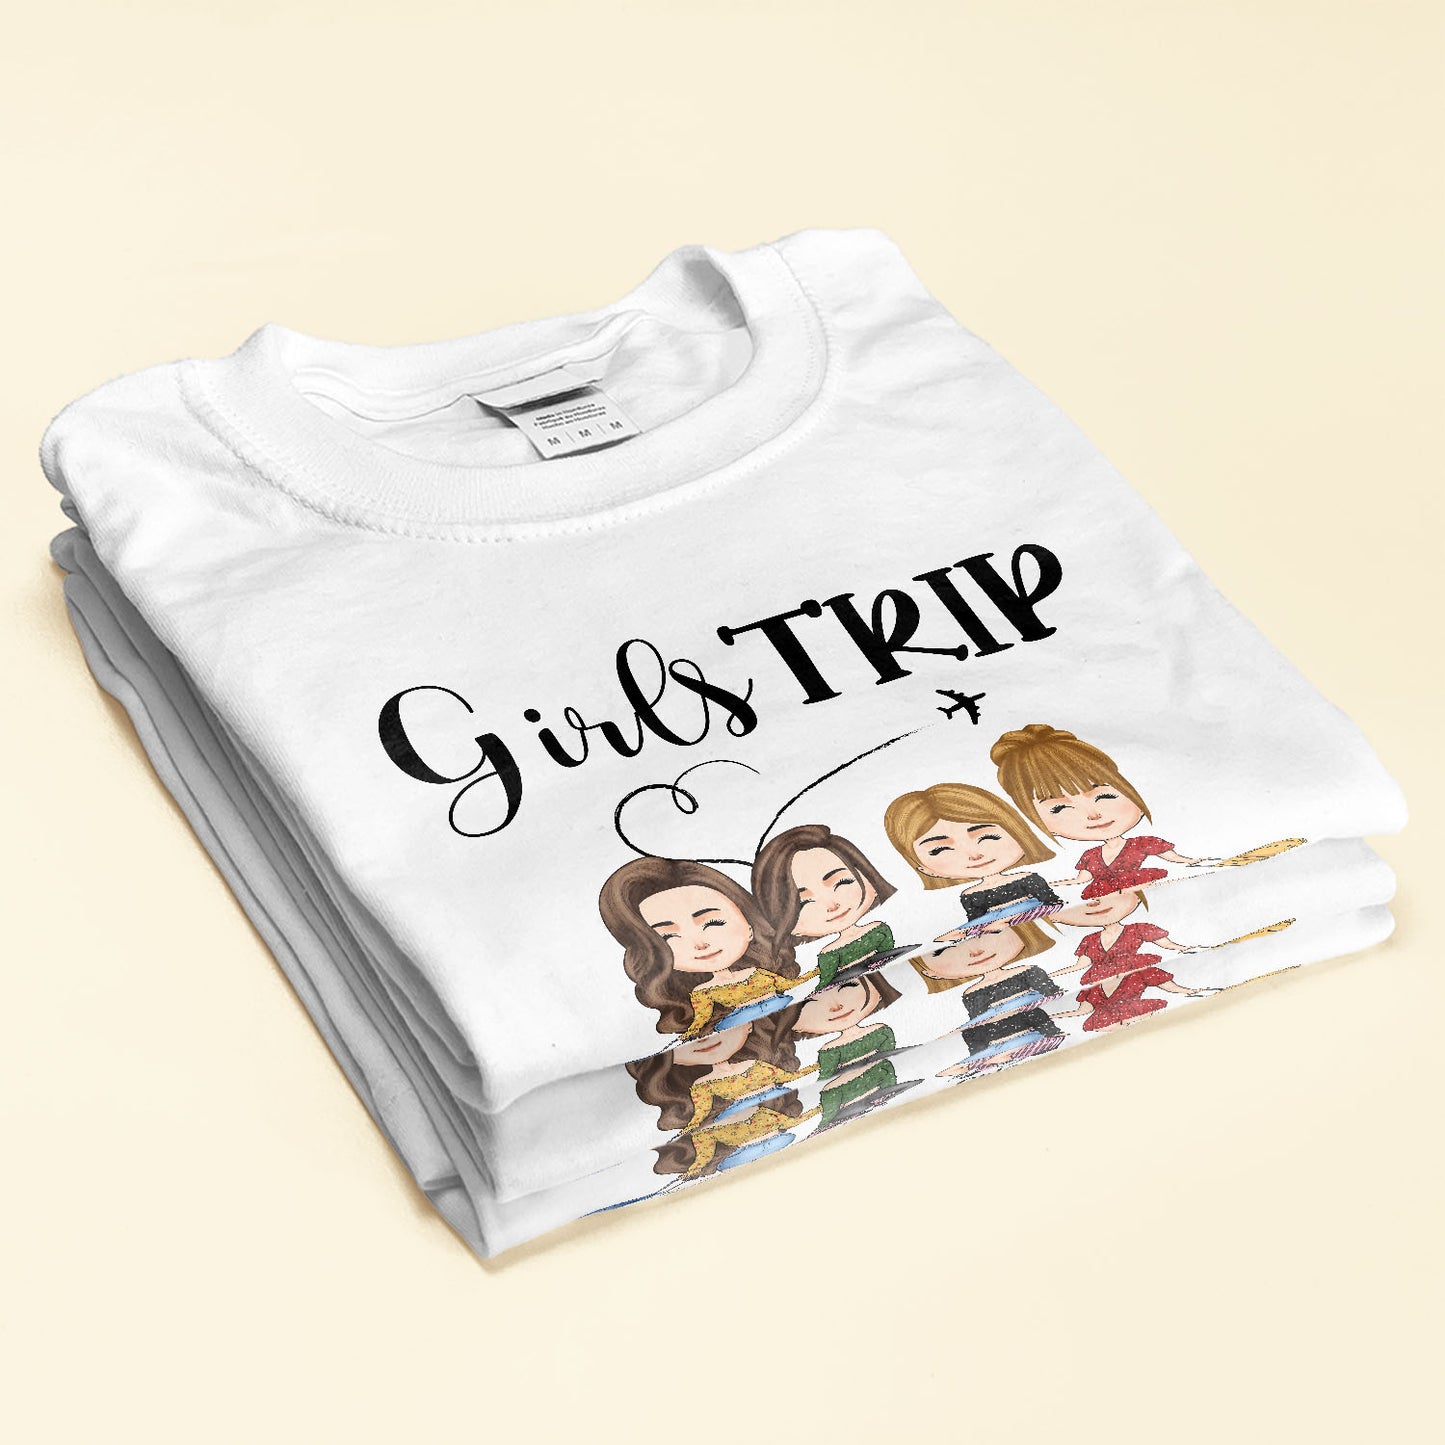 It's Girls Trip Version 2 - Personalized Shirt - Gift For Road Trip Crew, Travel Buddies, Trippin', Campin', Travelin'